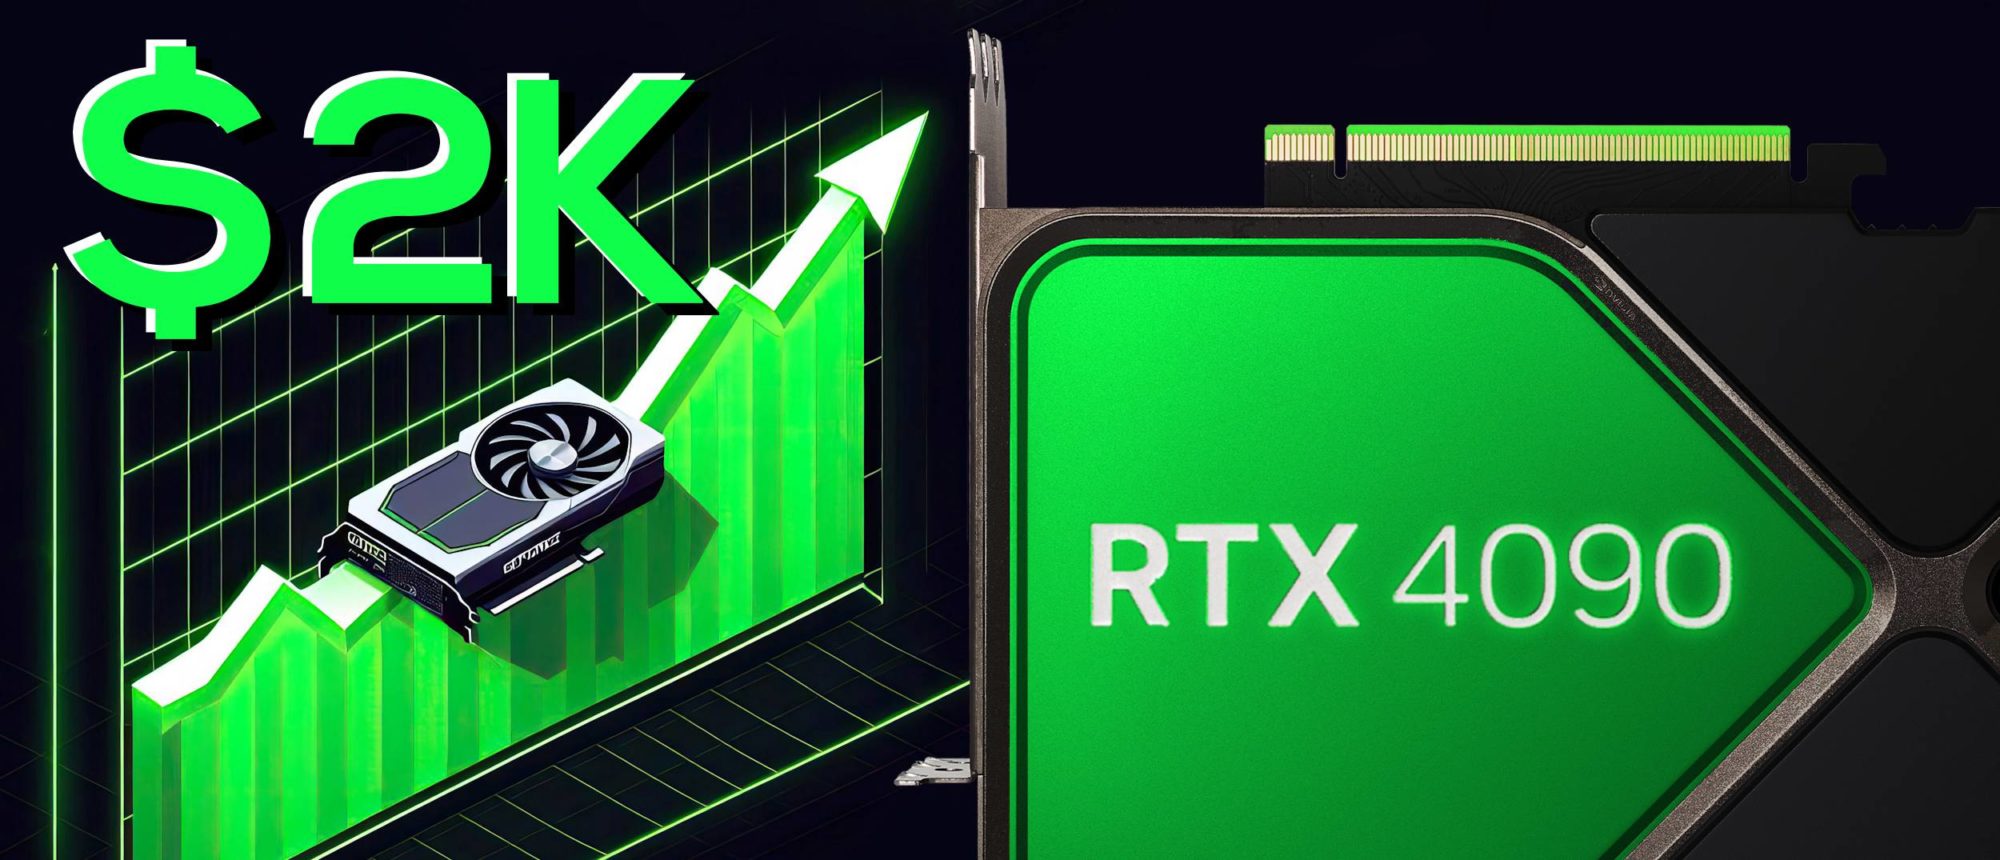 Nvidia Partners Finally Drop Prices on GeForce RTX 4090 and RTX 4080  Graphics Cards